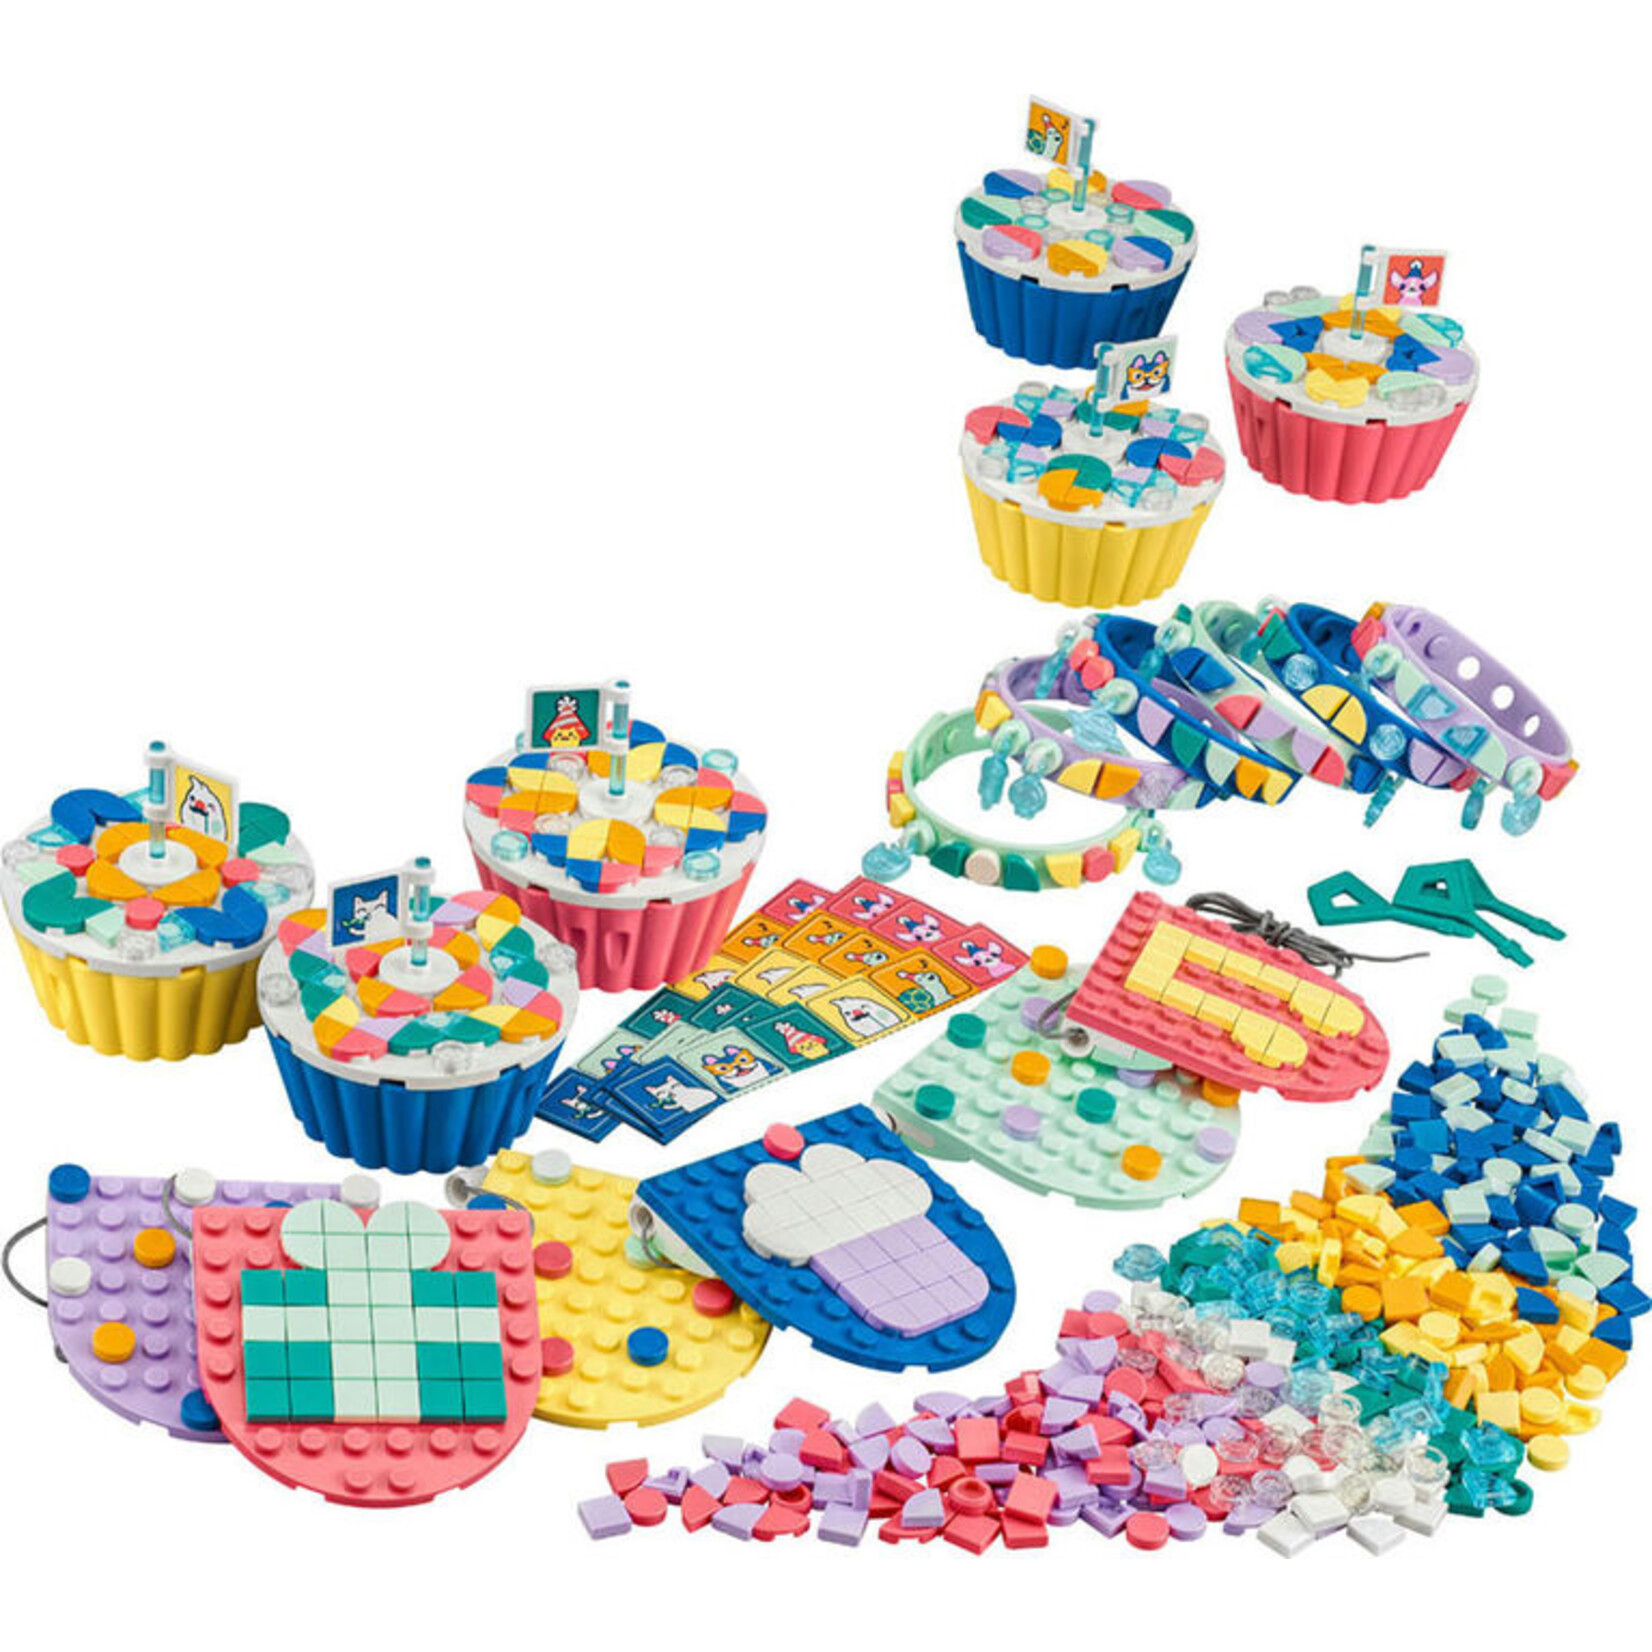 LEGO Dots Ultimate Party Kit